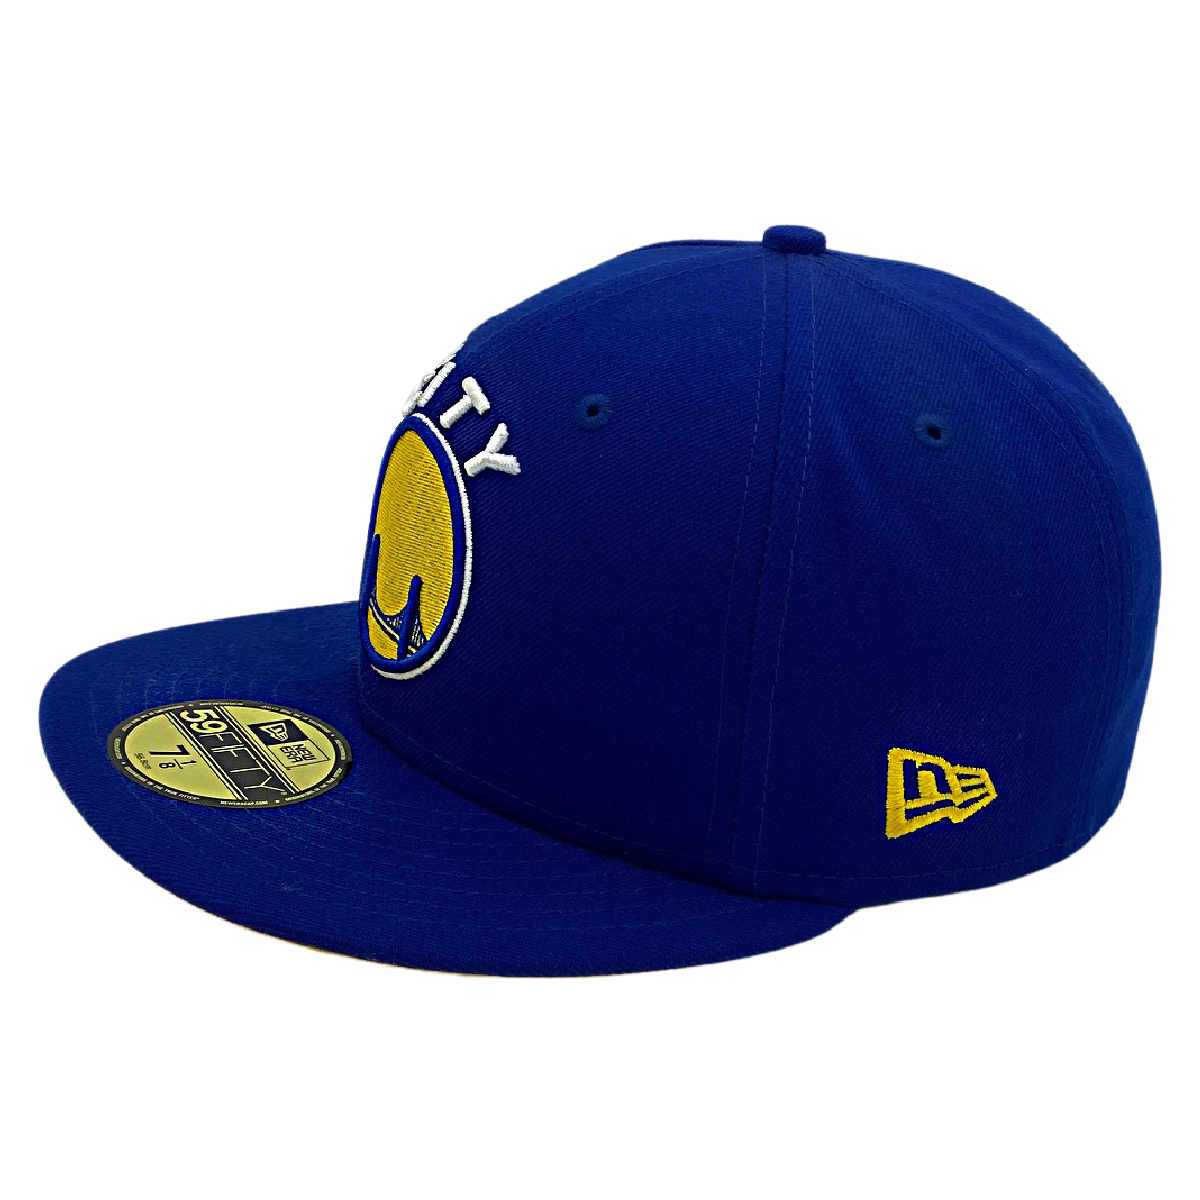 GOLDEN STATE WARRIORS THE CITY NEW ERA 59FIFTY HAT-BLUE/YELLOW Nvsoccer.com Thecoliseum